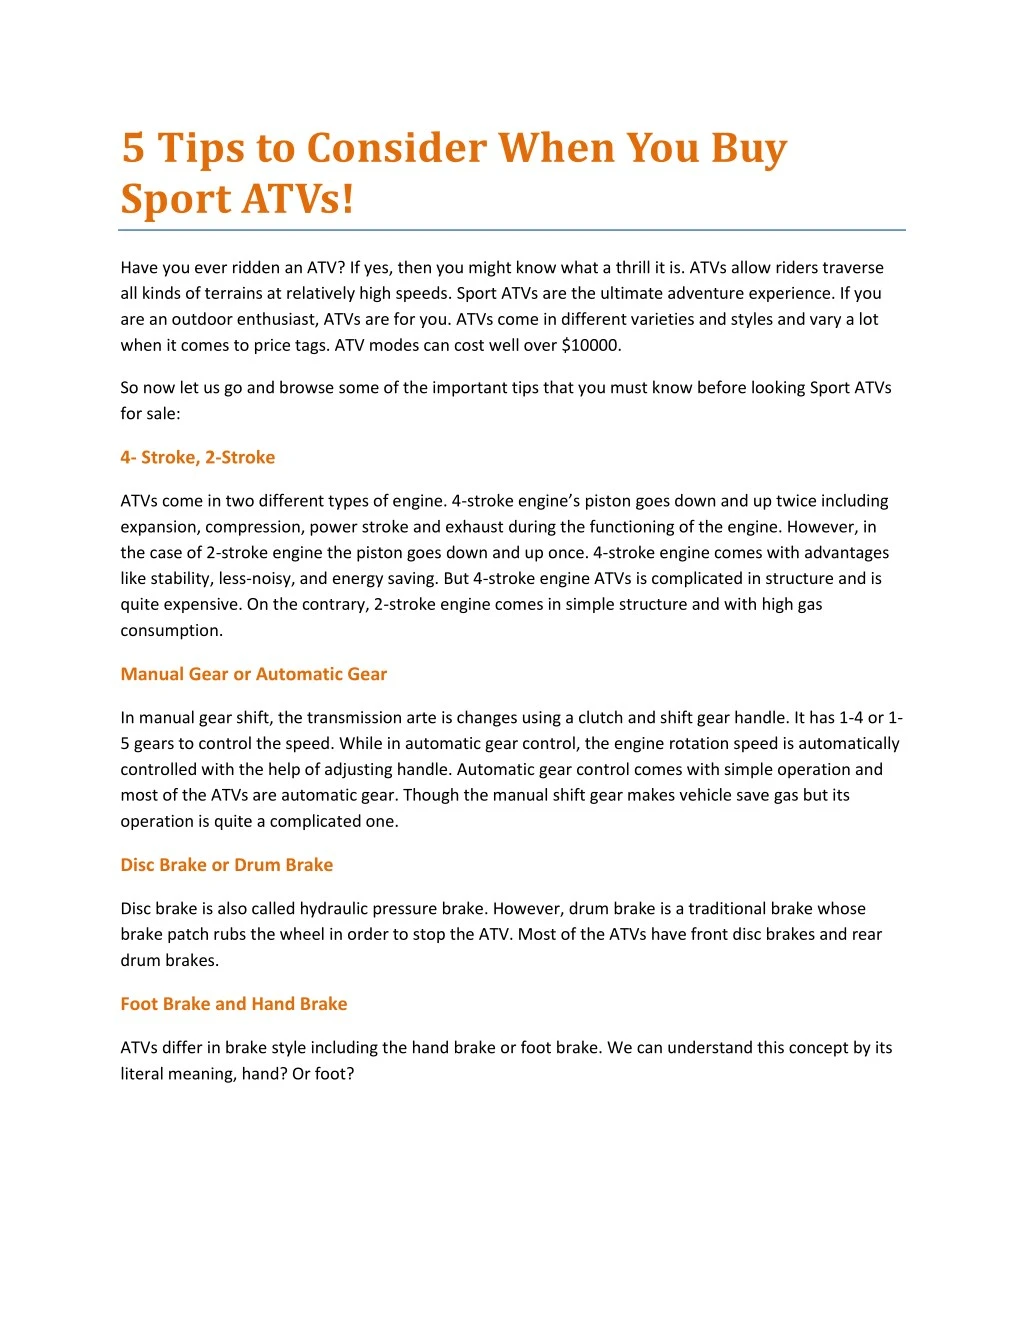 5 tips to consider when you buy sport atvs